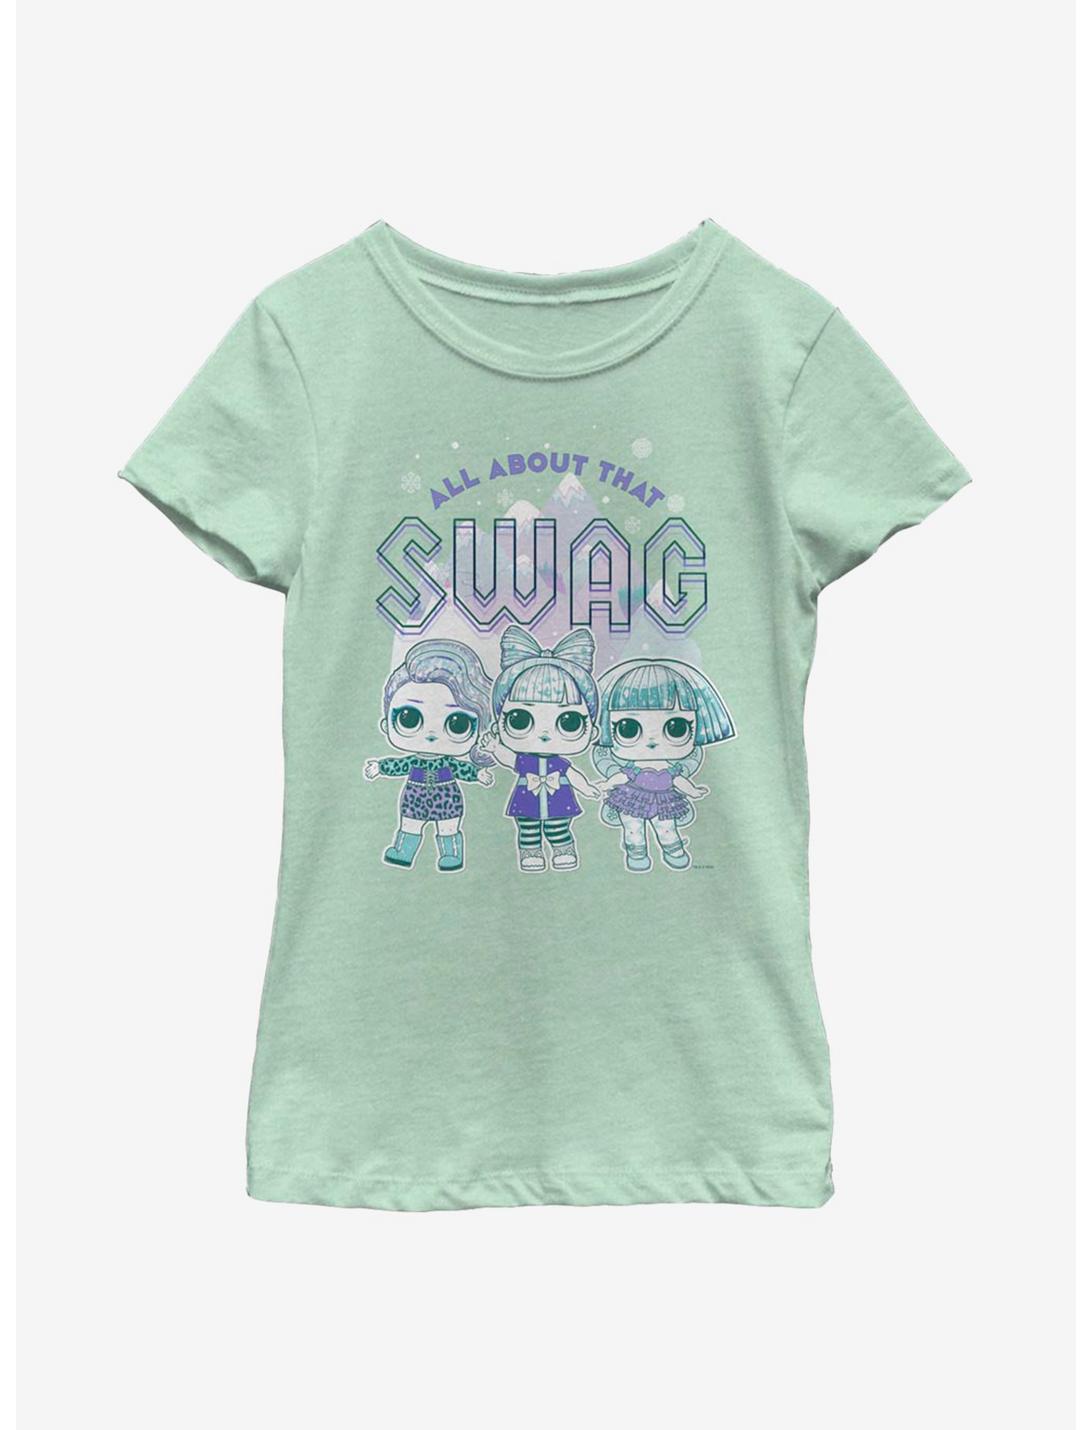 L.O.L. Surprise! All About Swag Youth Girls T-Shirt, MINT, hi-res